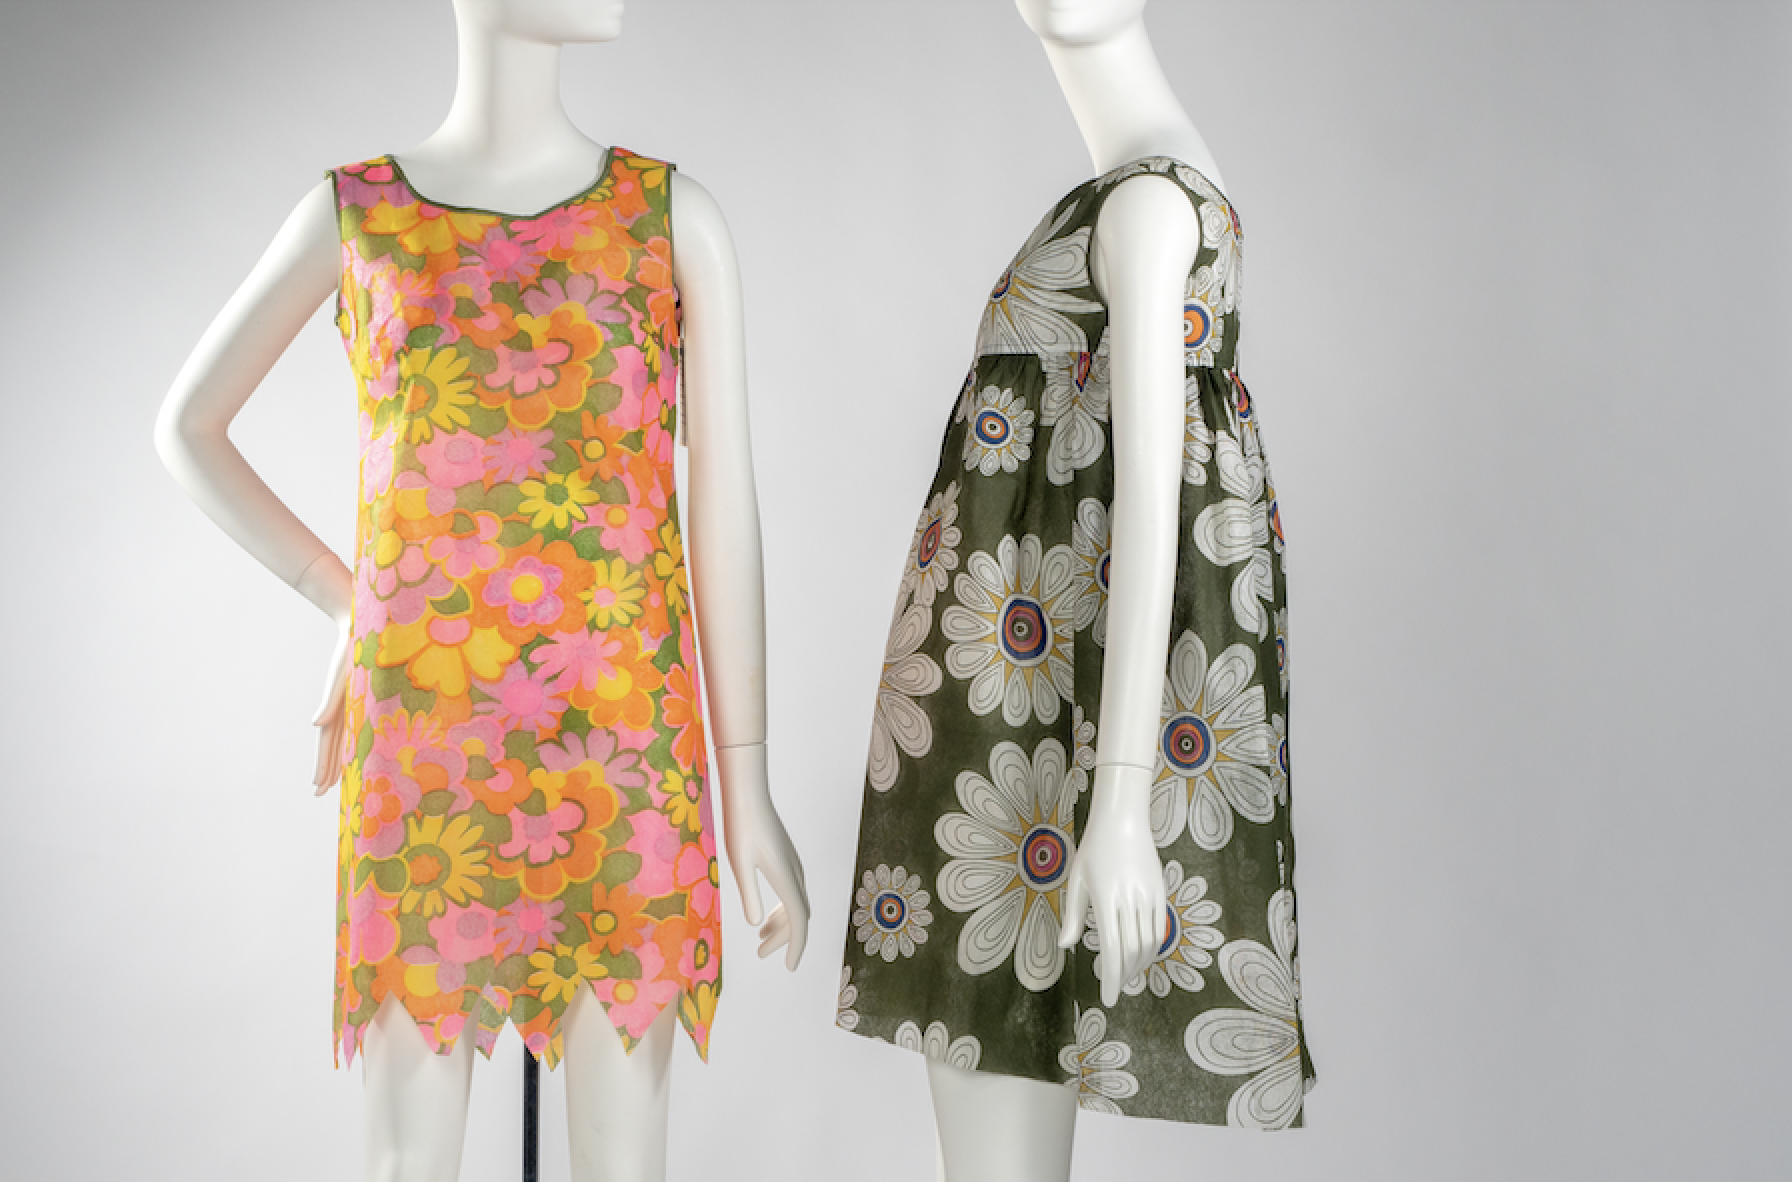 (Left to right) Misty Modes Daisy Mae shift, 1960s, printed Du Pont Reemay spunbonded polyester, collection of Phoenix Art Museum, gift of Kelly Ellman; James Sterling Paper Fashions dress, 1960s, printed Du Pont Reemay spunbonded polyester, collection of Phoenix Art Museum, gift of Kelly Ellman. Courtesy of Phoenix Art Museum, photo credit Airi Katsuta 